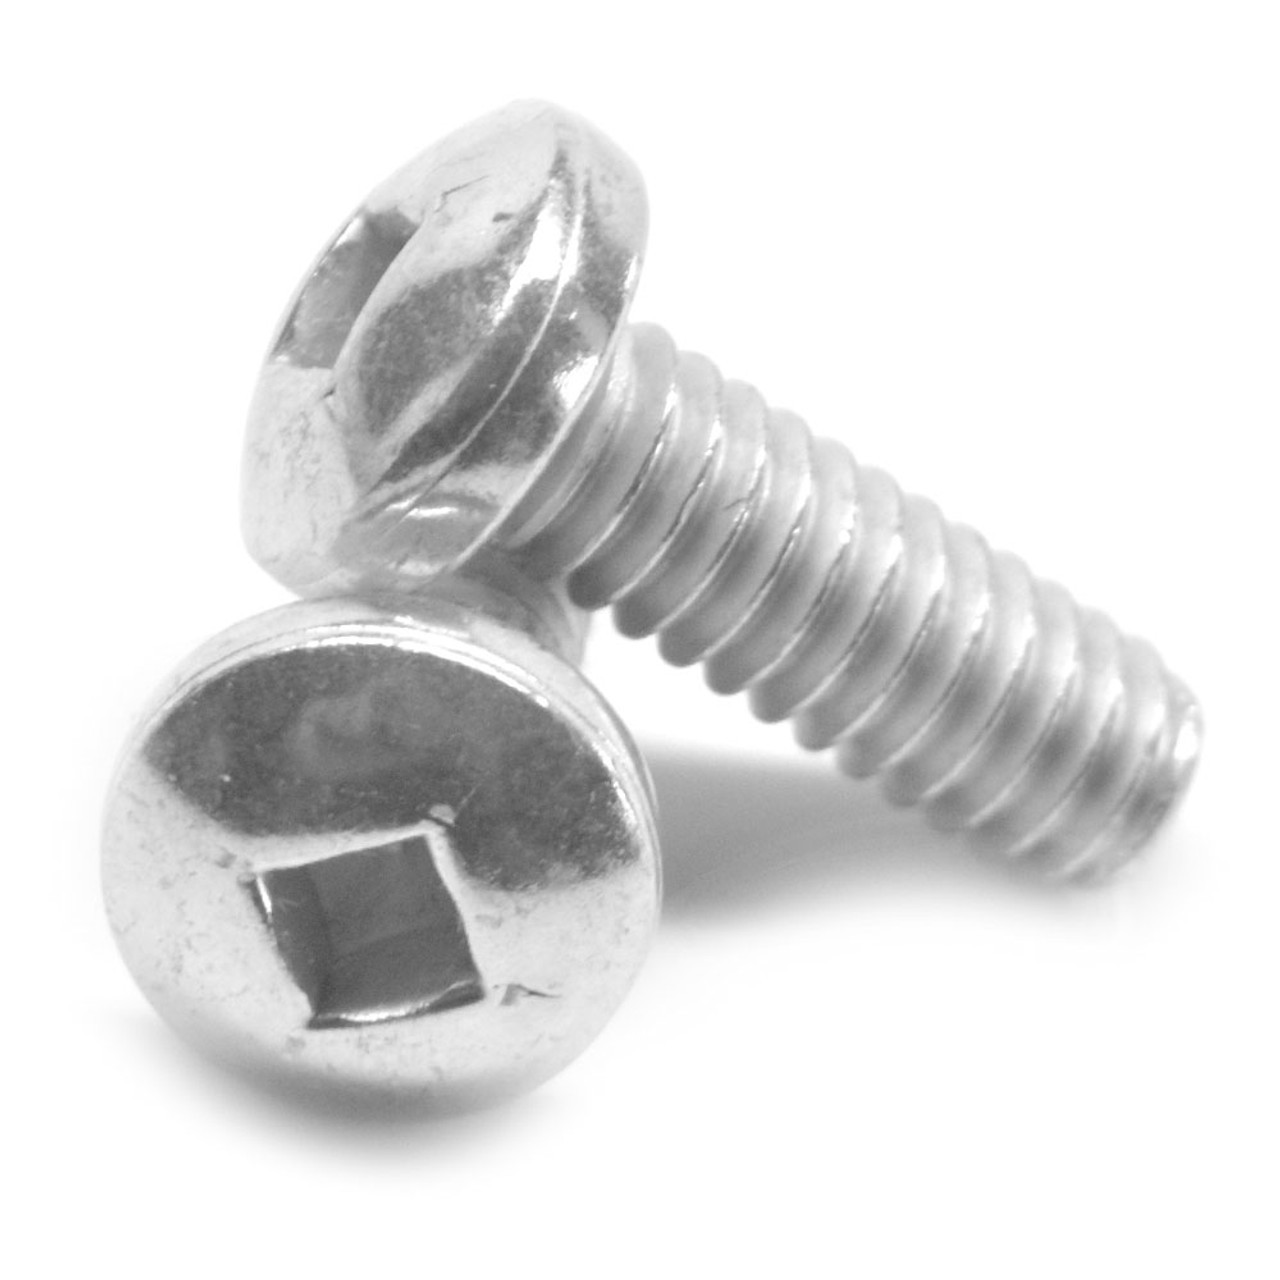 #10-24 x 3/8" (FT) Coarse Thread Machine Screw Square Drive Pan Head Stainless Steel 18-8